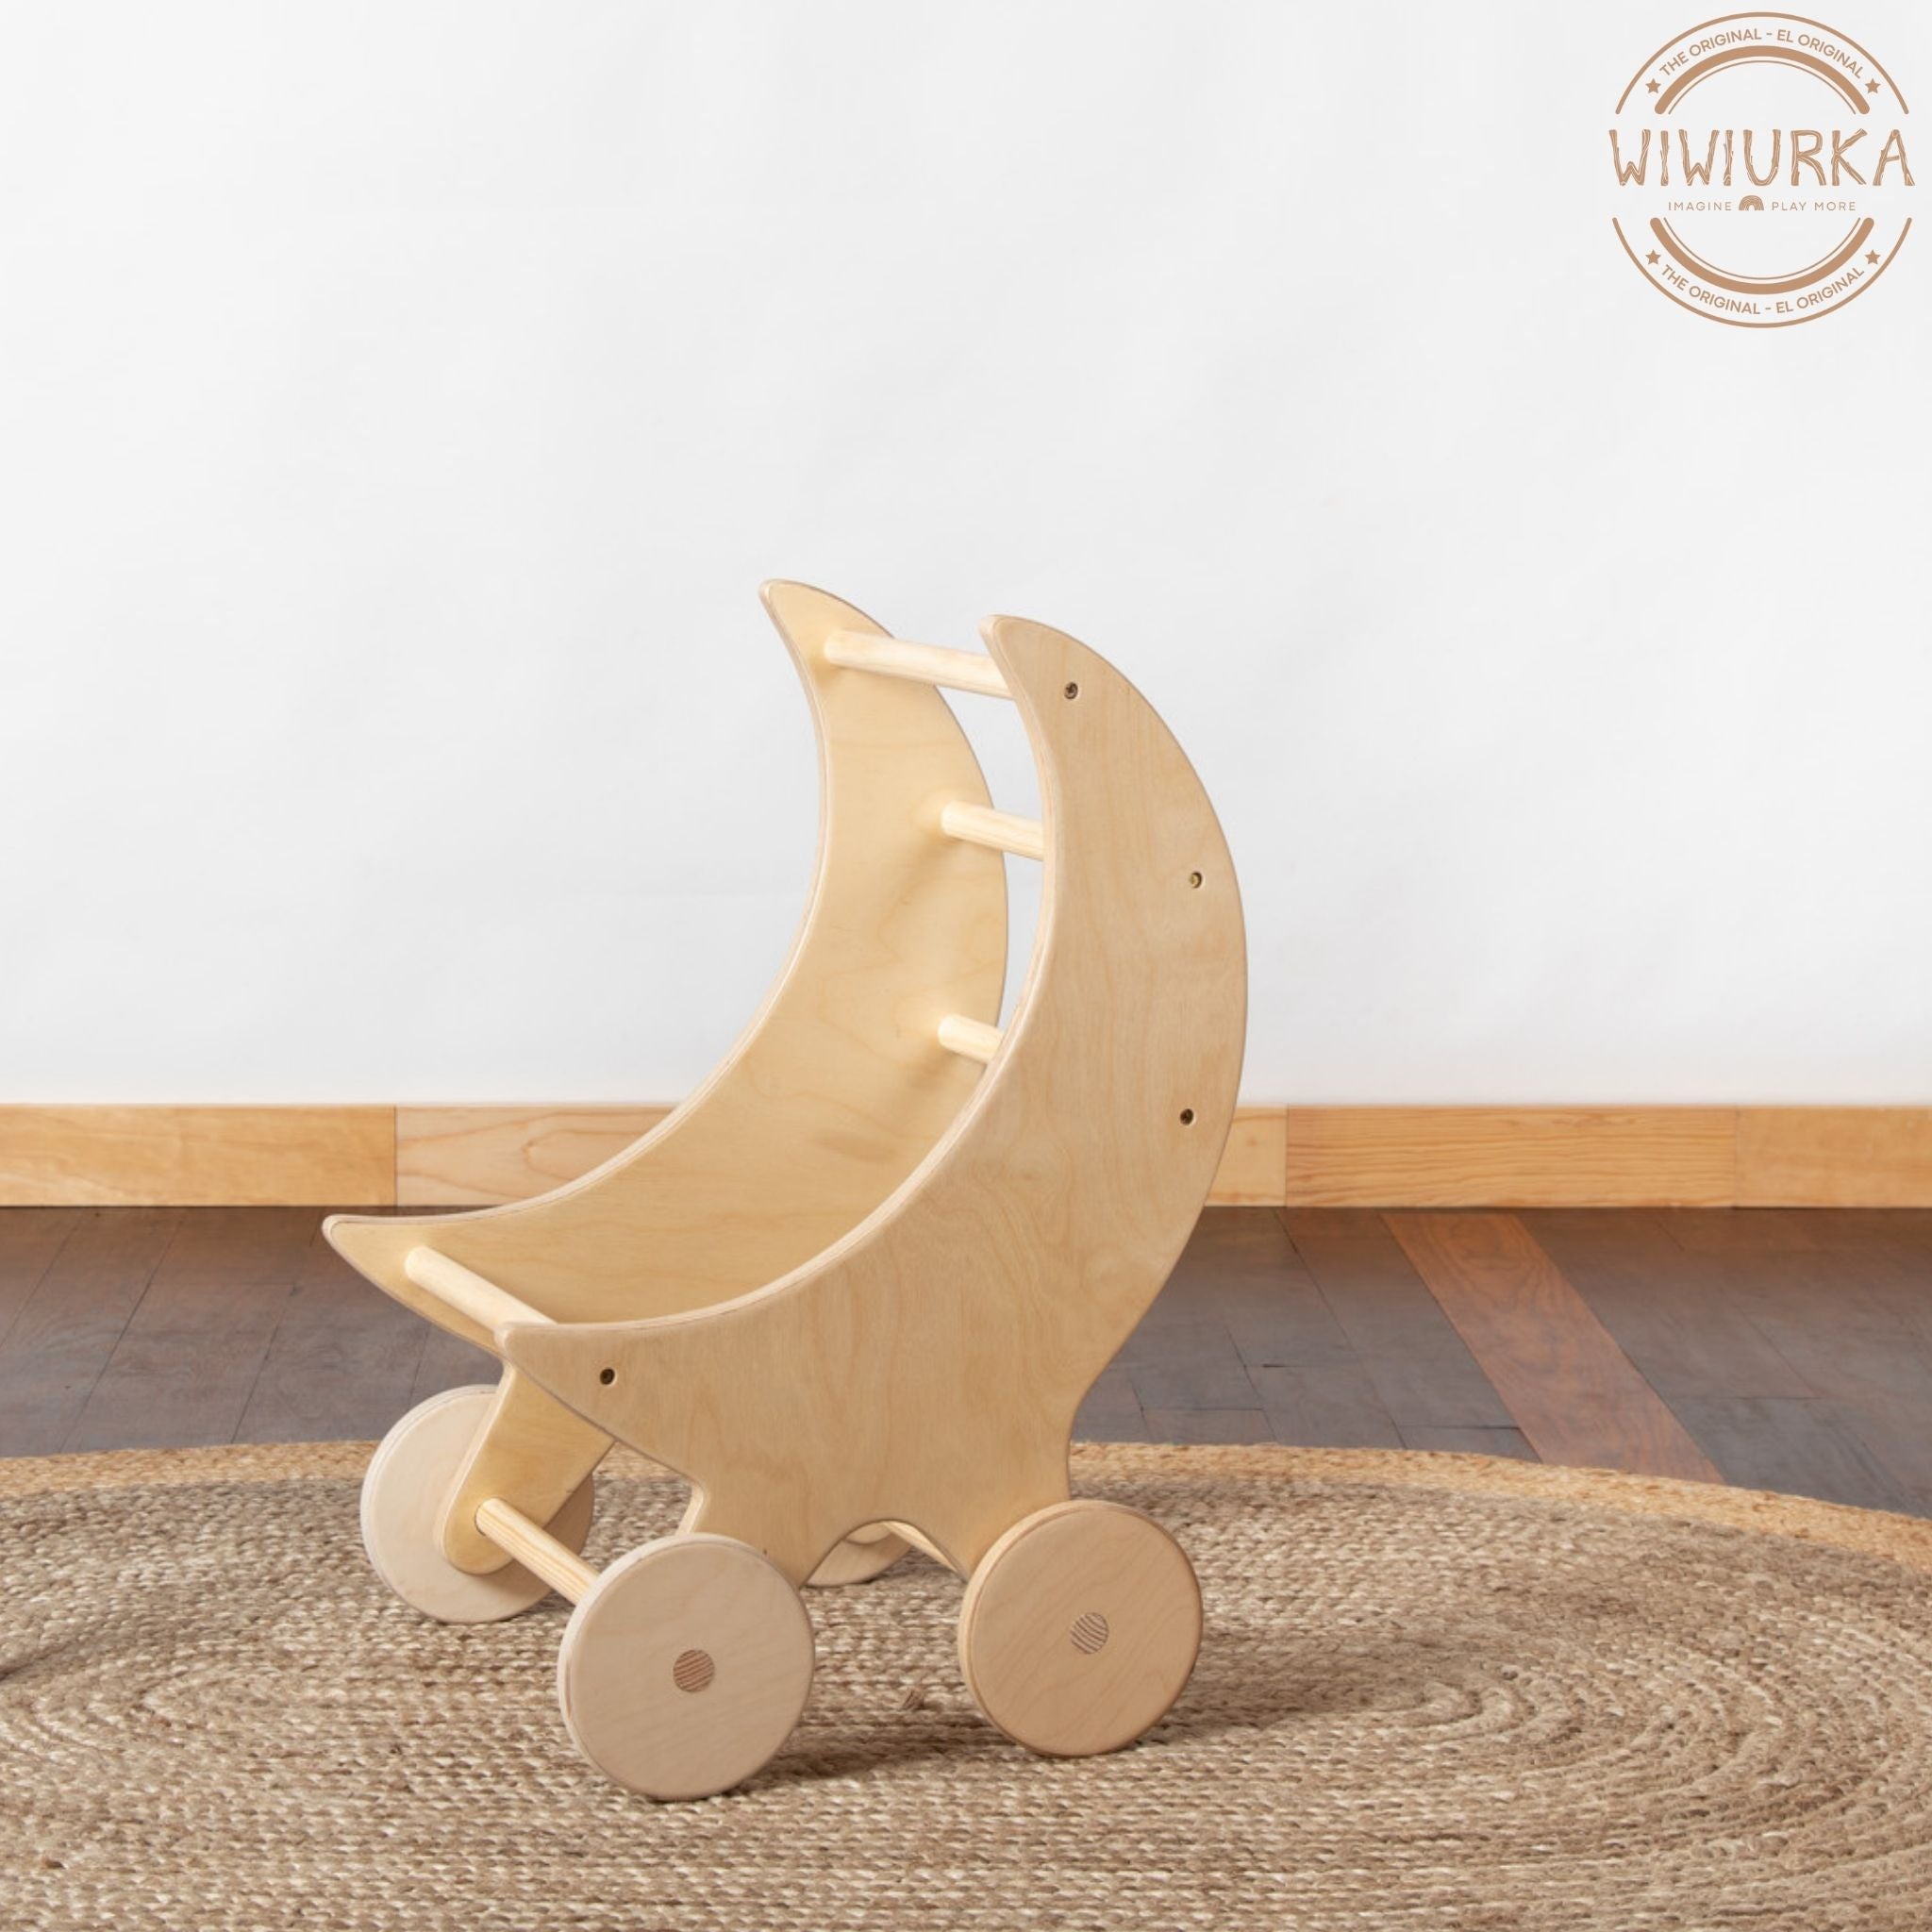 MOON SHAPED DOLL STROLLER by Wiwiurka Toys